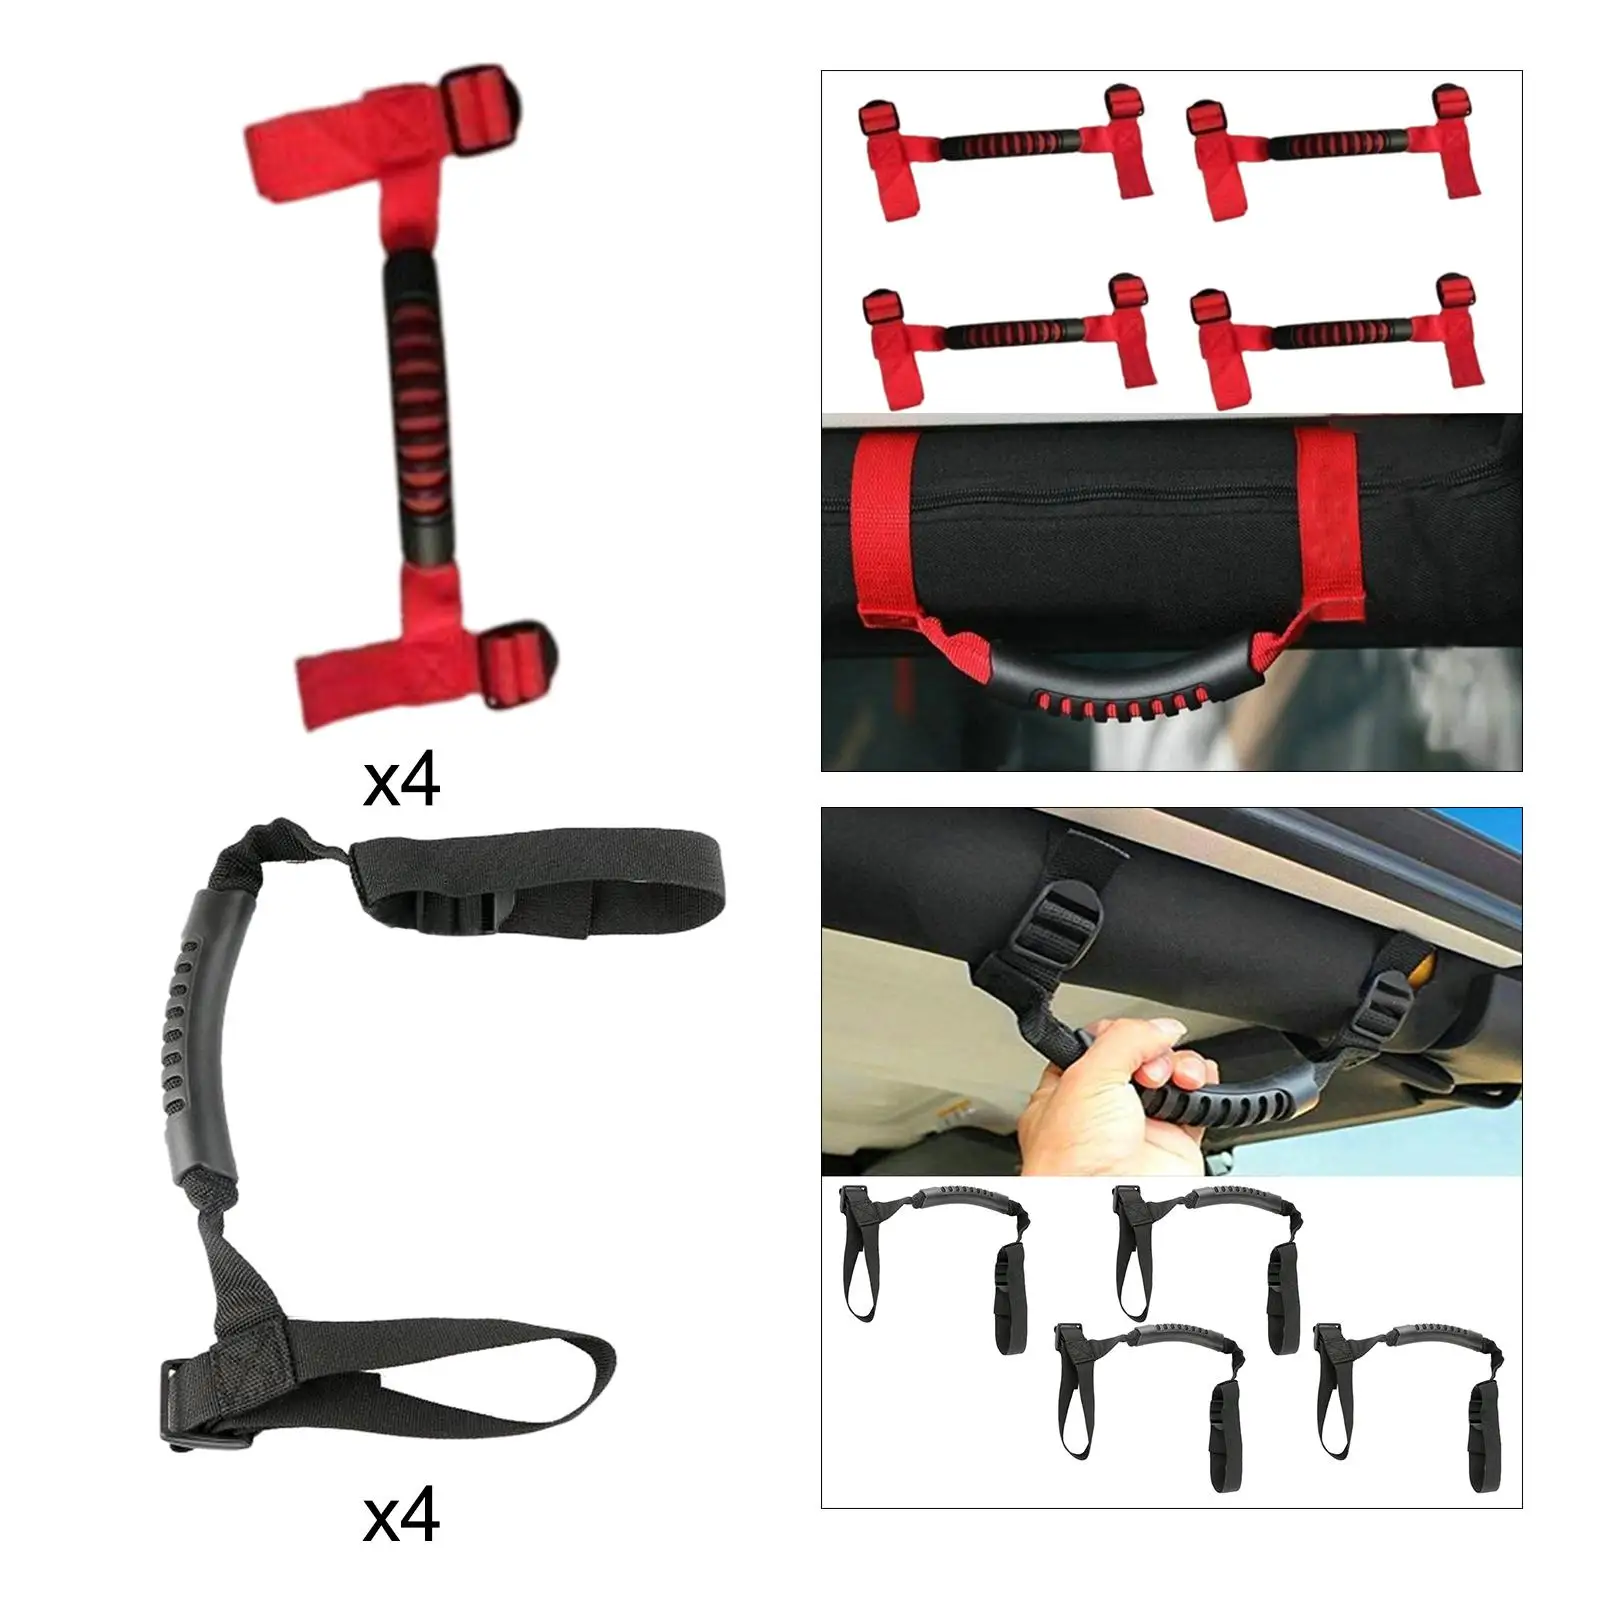 4 Pieces Grab Handles Grip Handle Replaces for Jeep Wrangler Accessories Easily Install and Put Off Durable Anti Slip